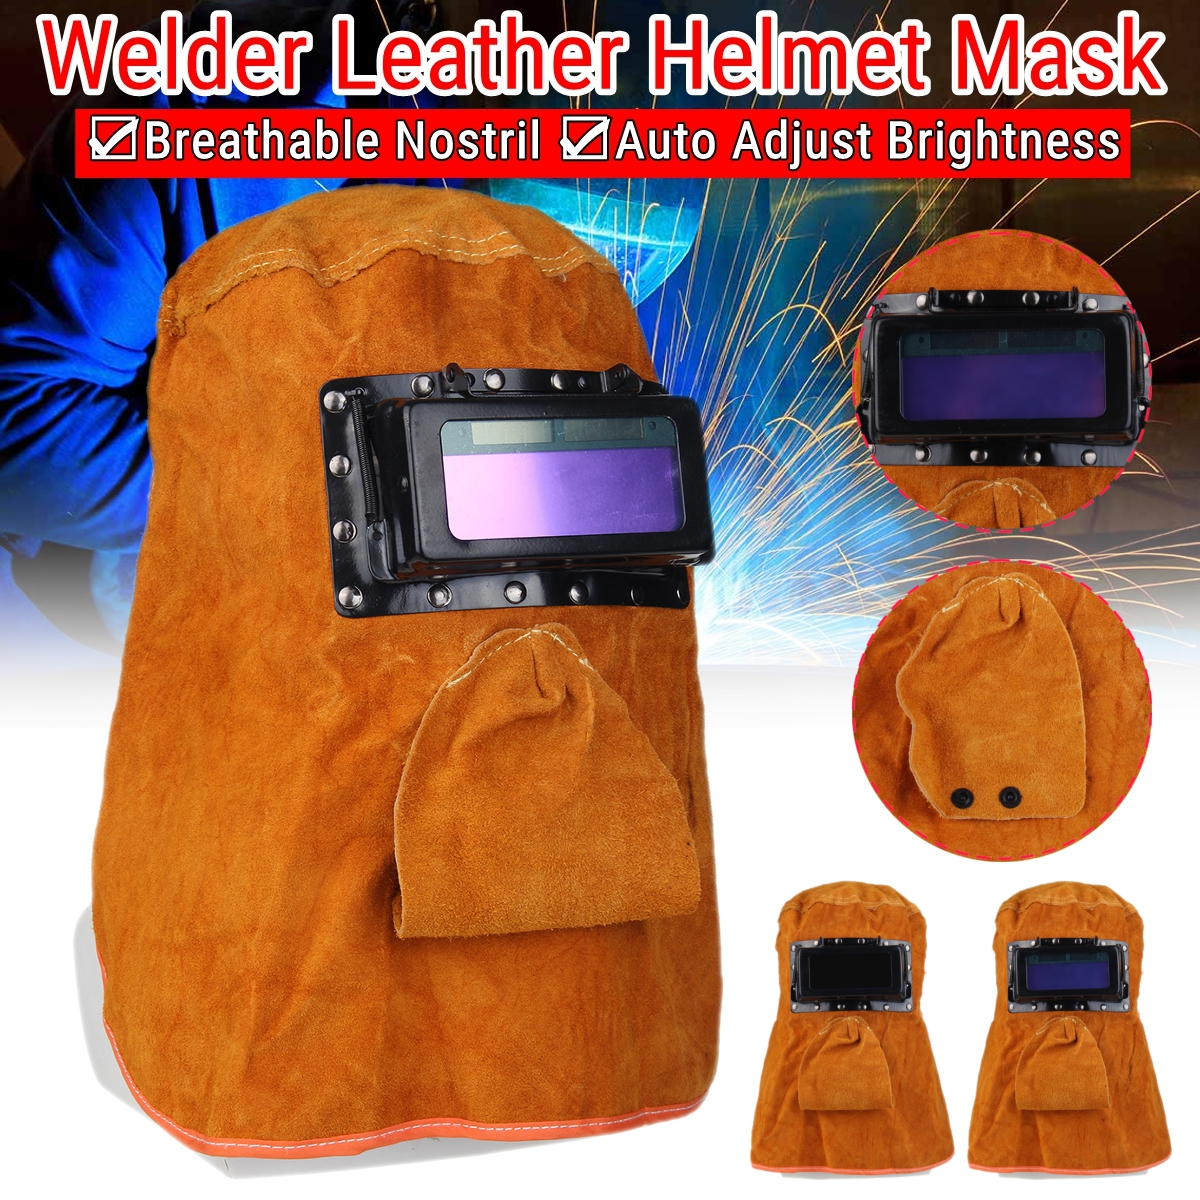 Find Solar Auto Darkening Filter Lens Welder Leather Hood Breathable Helmet Mask with Glasses for Sale on Gipsybee.com with cryptocurrencies